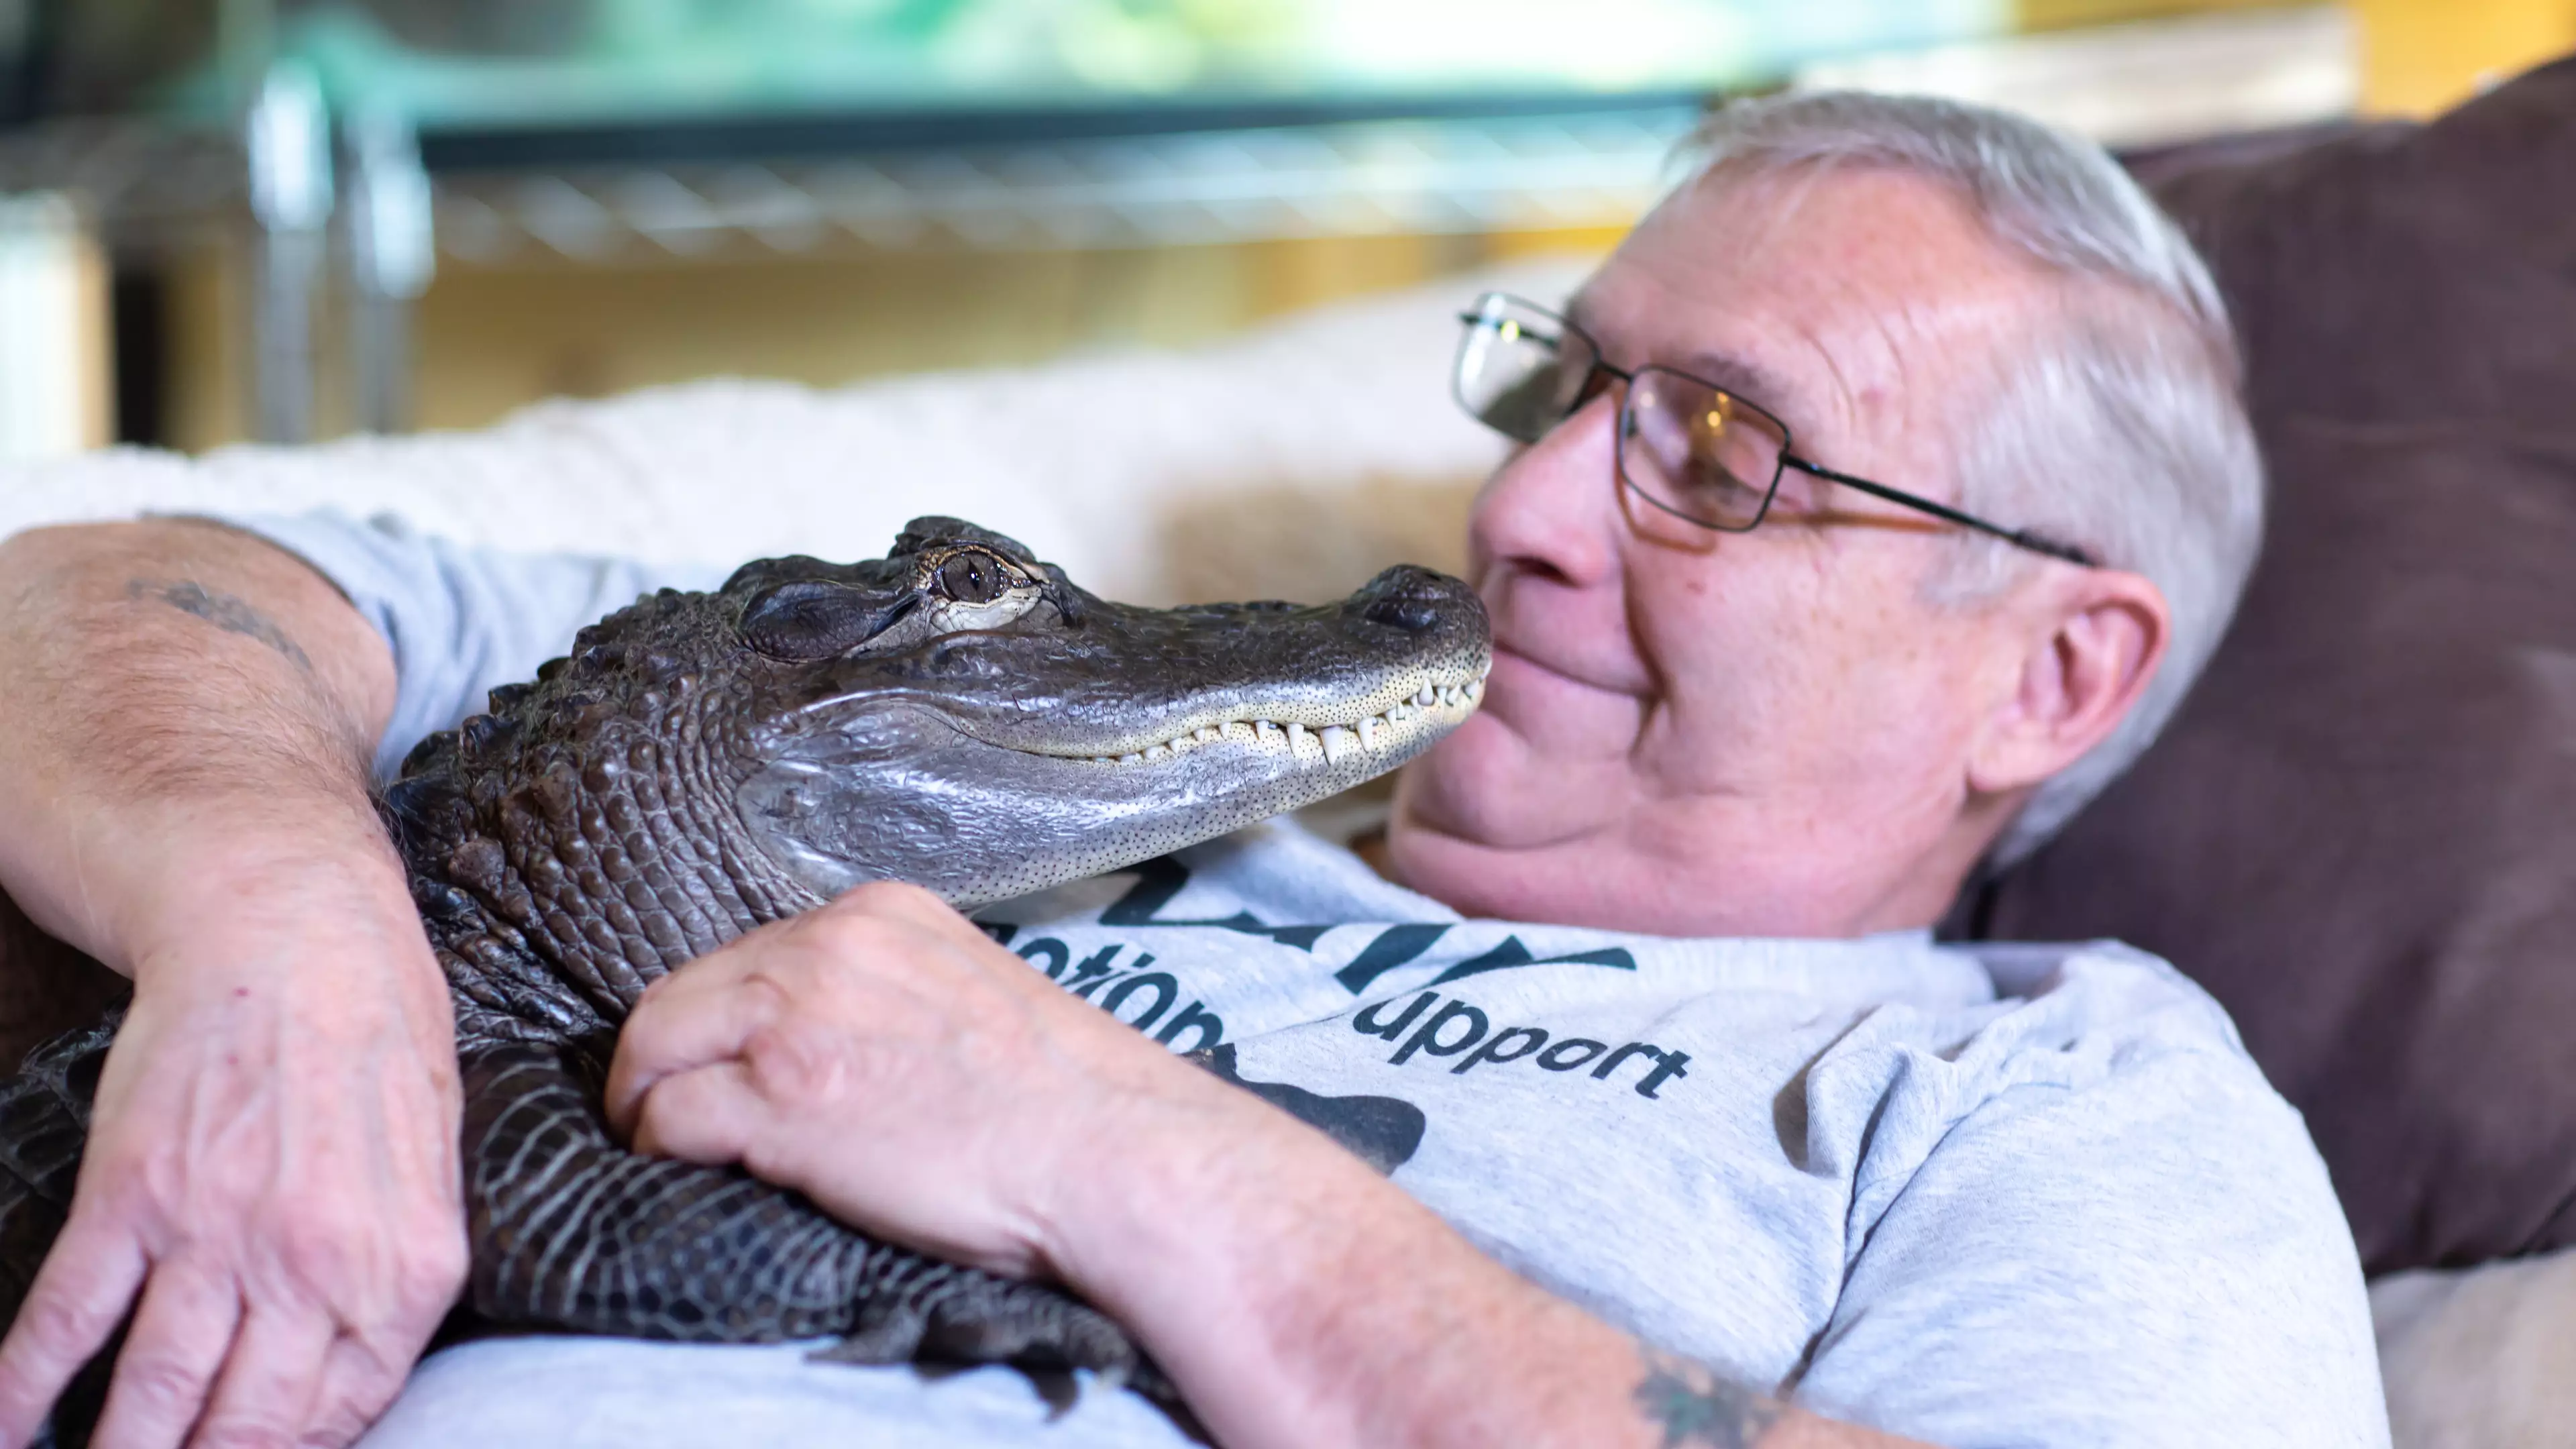 Man Has Alligator As Emotional Support Animal After It Helped Him Through Depression